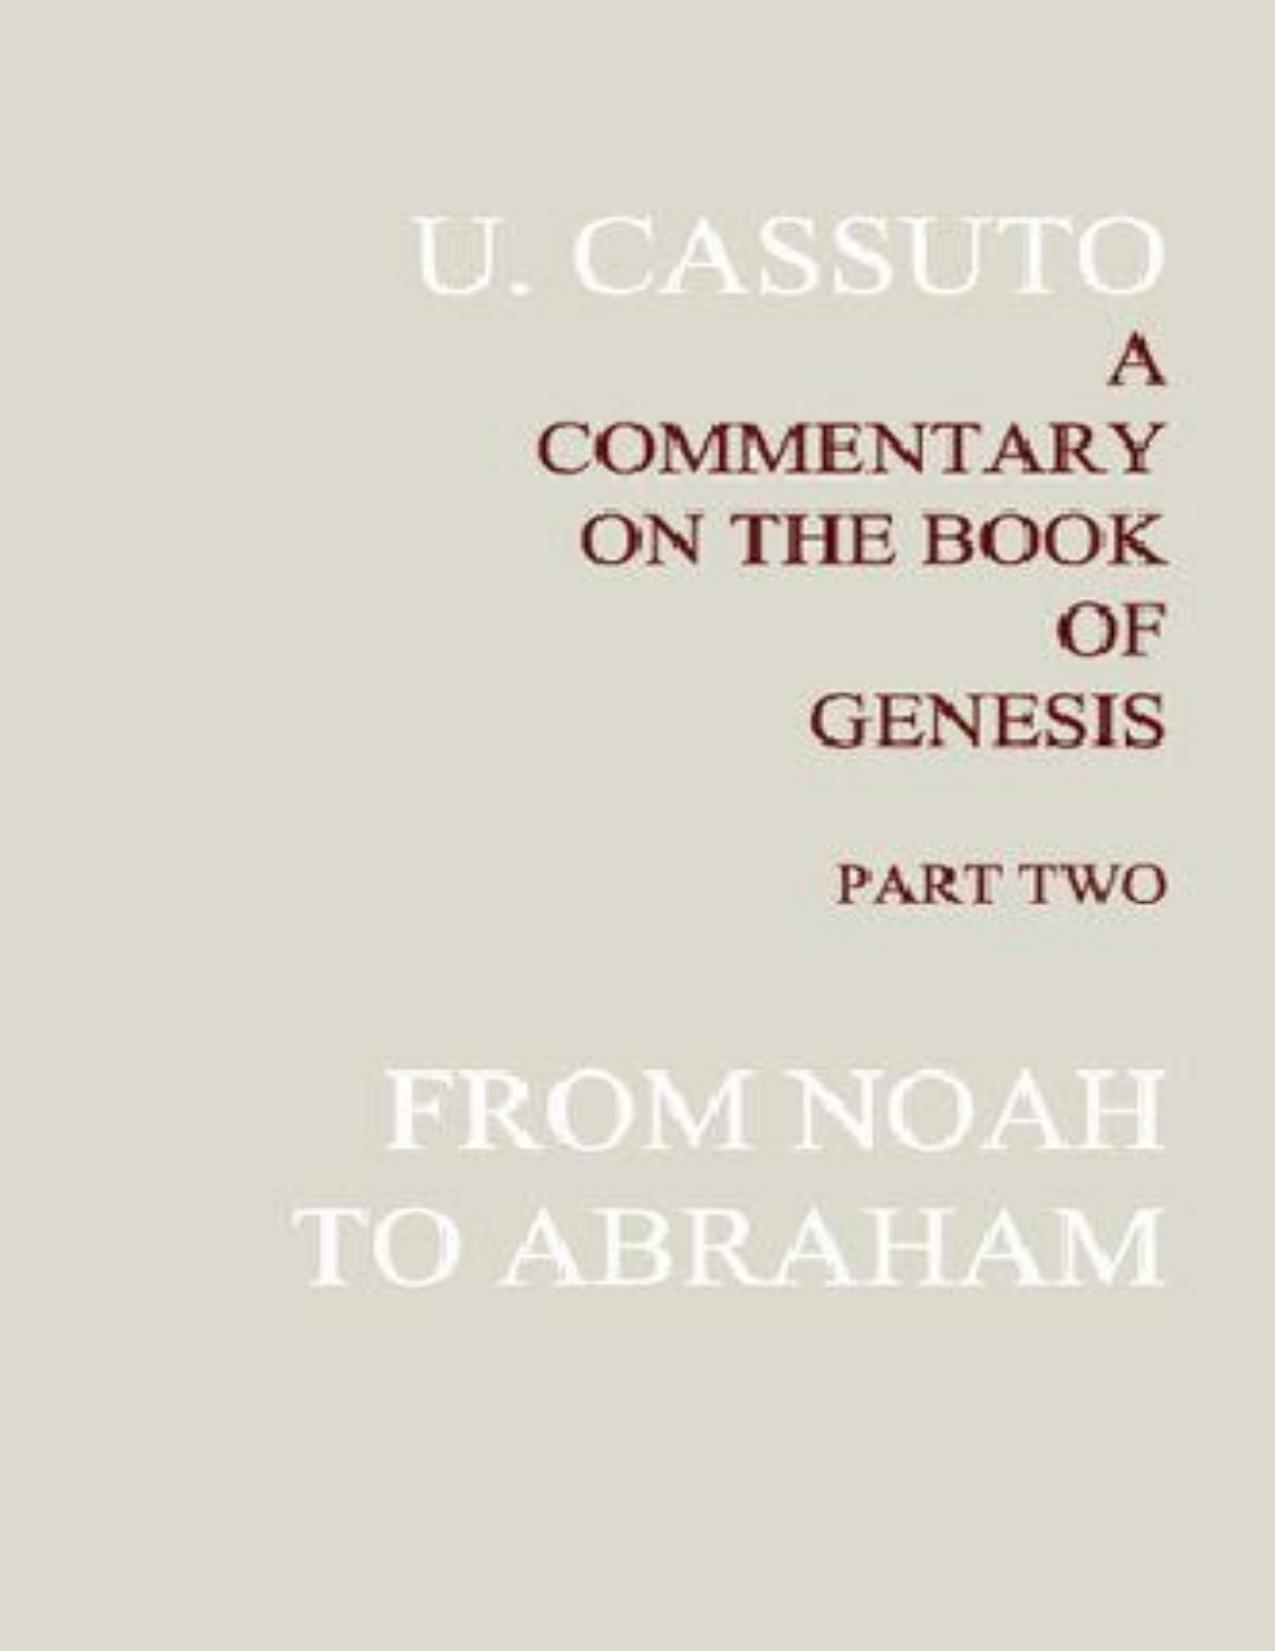 A Commentary on the Book of Genesis, Part 2: from Noah to Abraham - PDFDrive.com